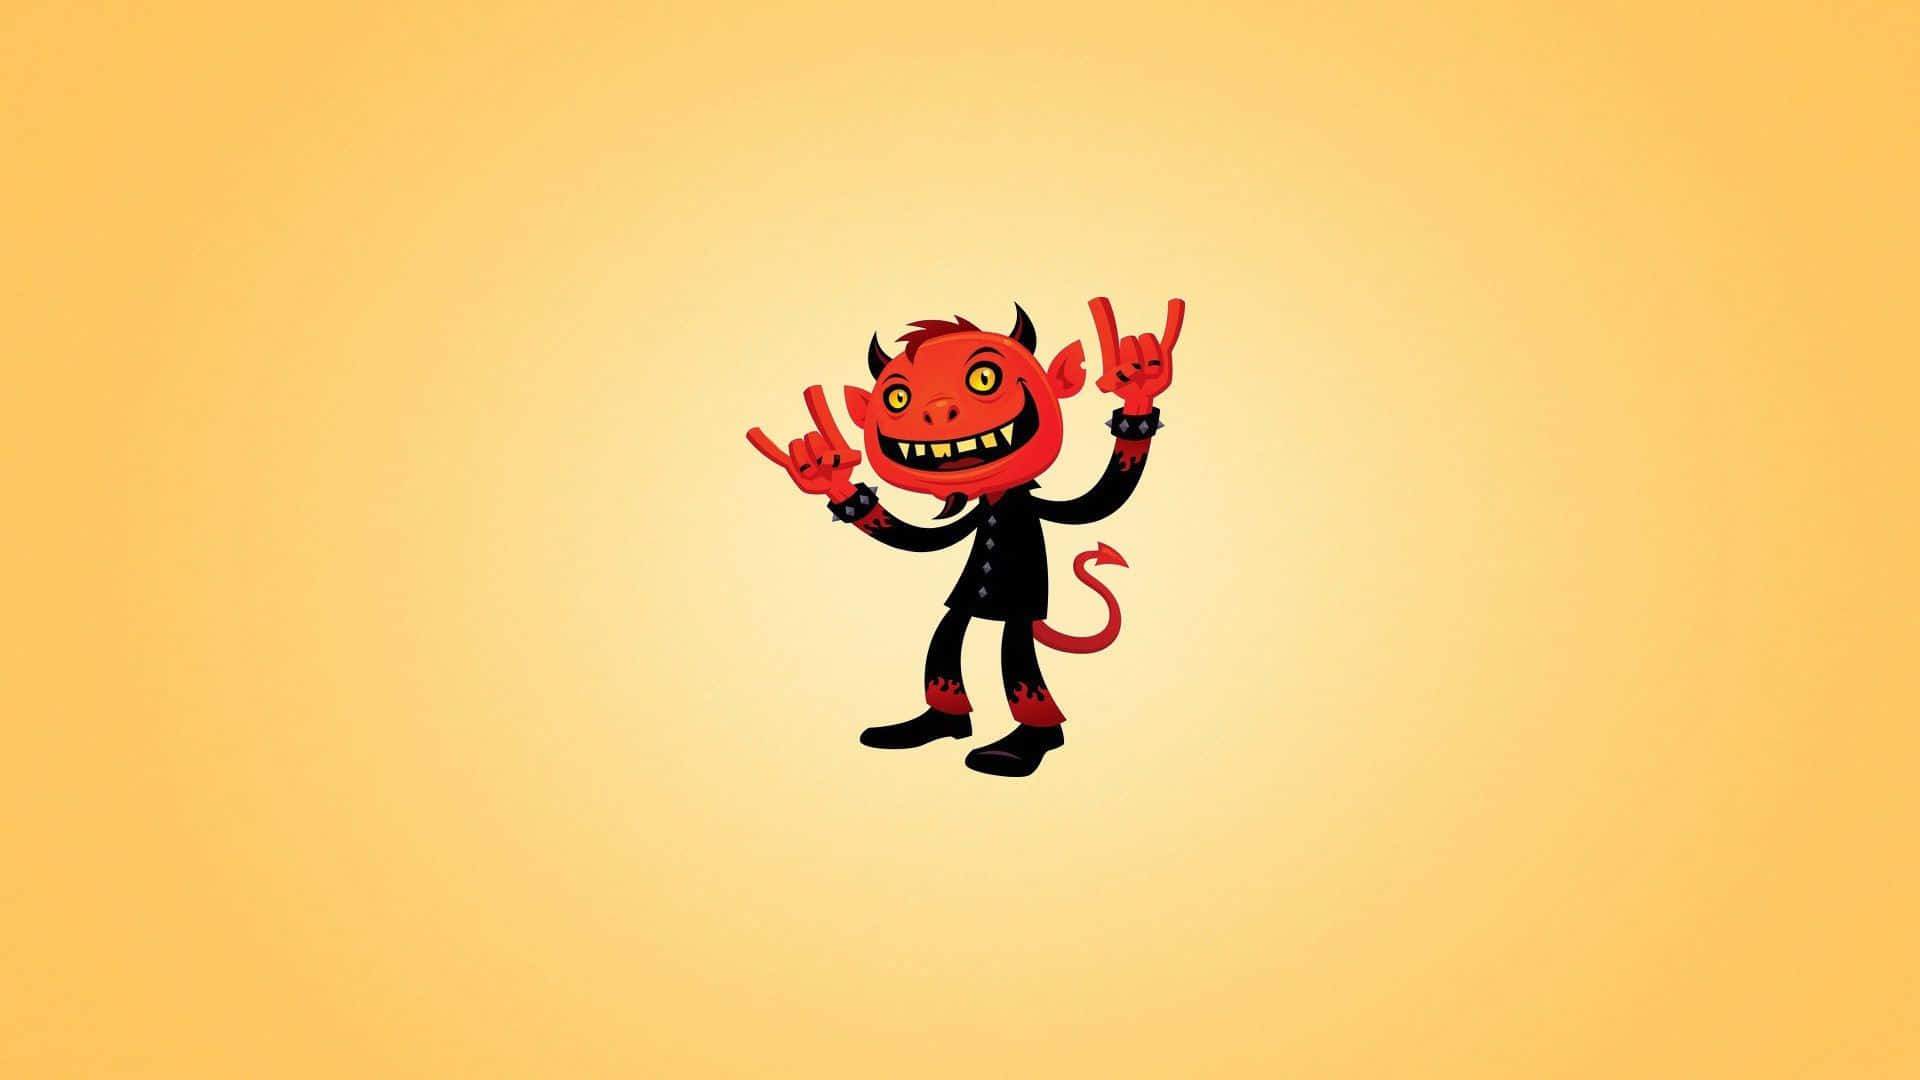 A Cartoon Devil With A Ring On His Finger